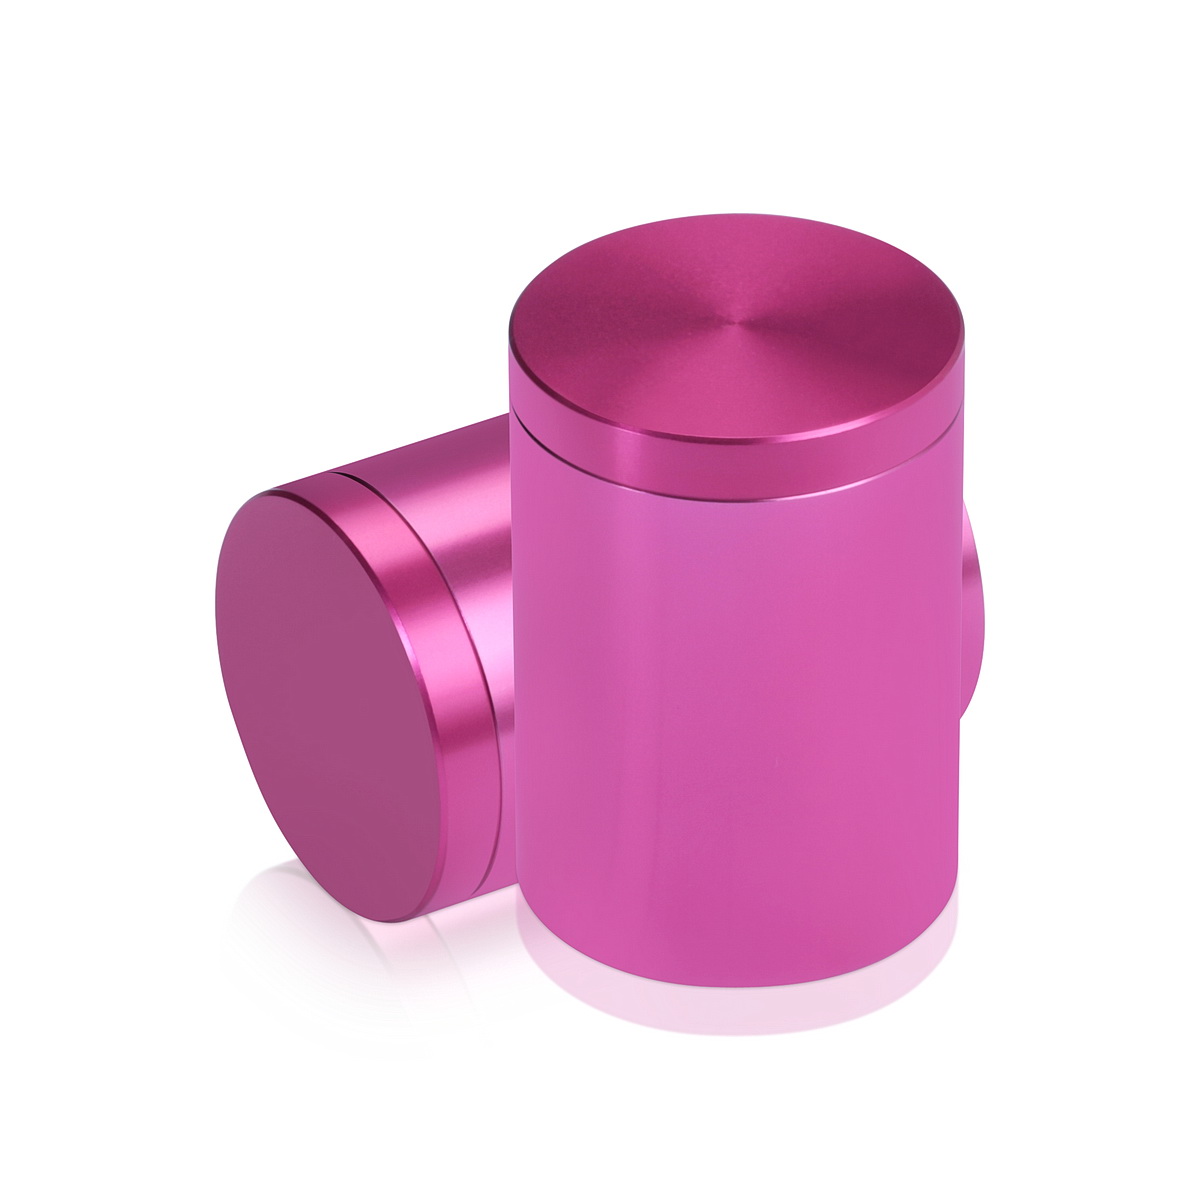 1-1/4'' Diameter X 1-1/2'' Barrel Length, Affordable Aluminum Standoffs, Rosy Pink Anodized Finish Easy Fasten Standoff (For Inside / Outside use) [Required Material Hole Size: 7/16'']